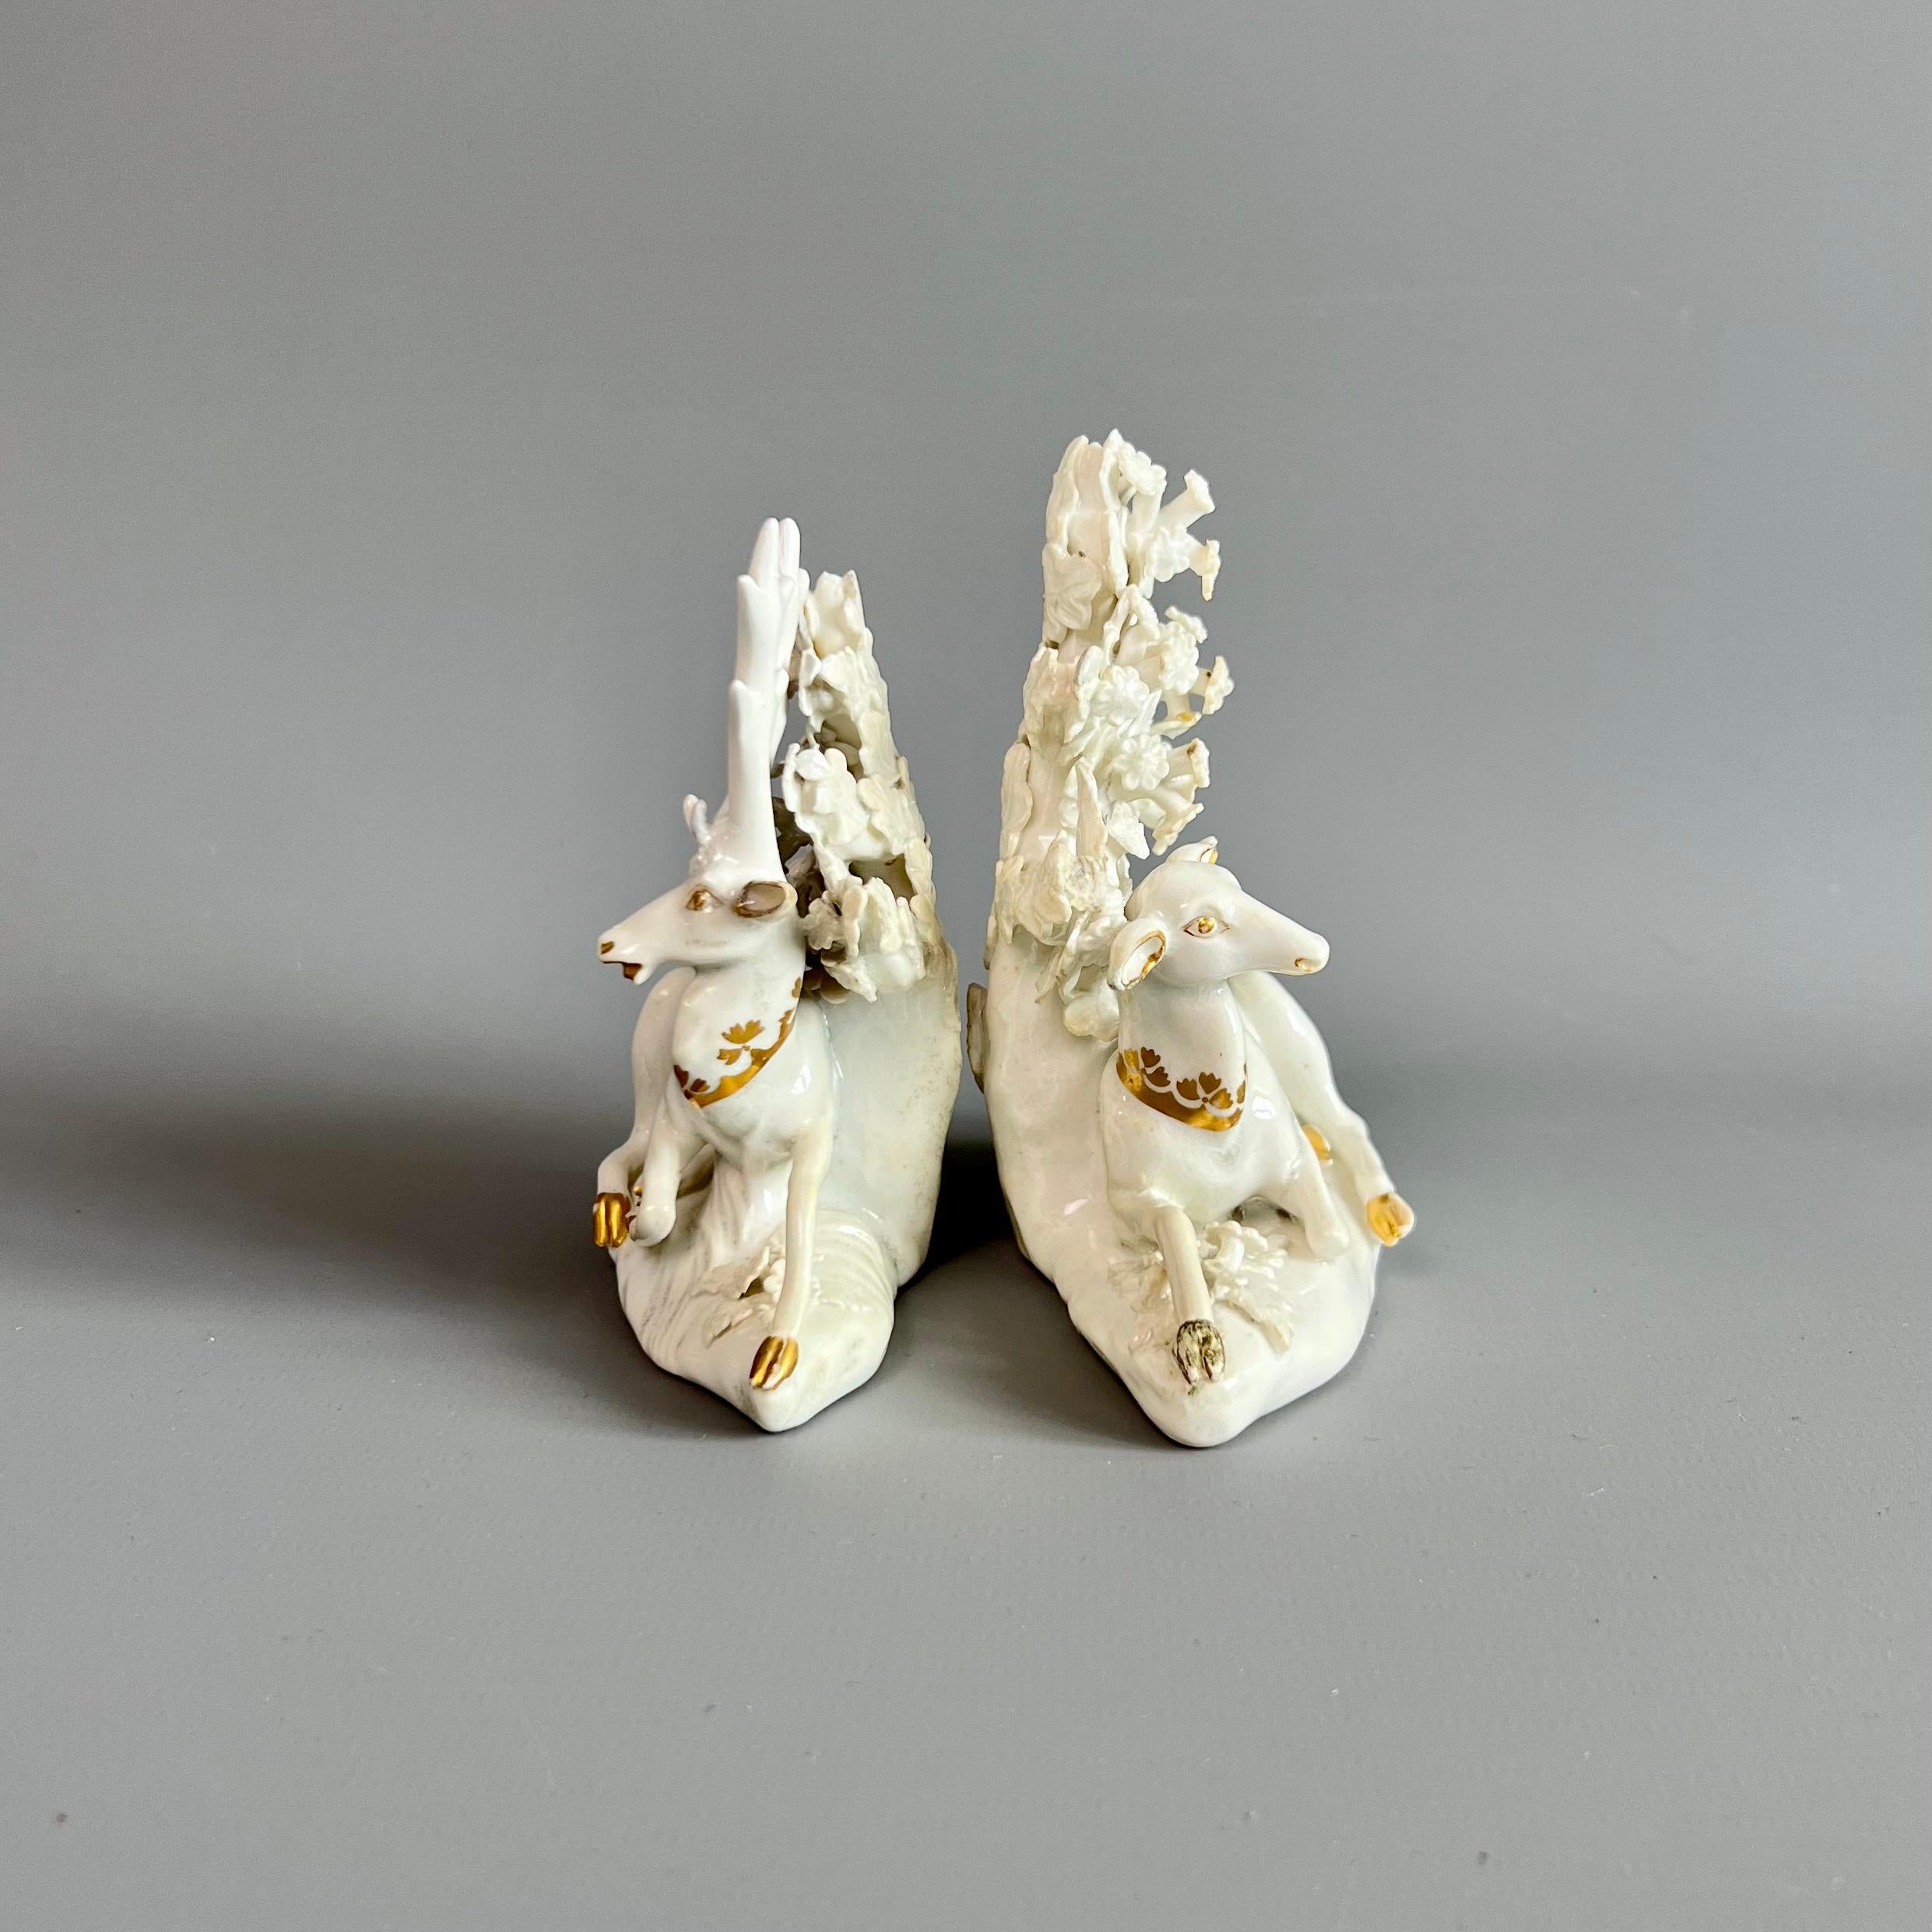 English Bloor Derby Pair of Porcelain Figures, Stag and Doe, circa 1765-1820 For Sale